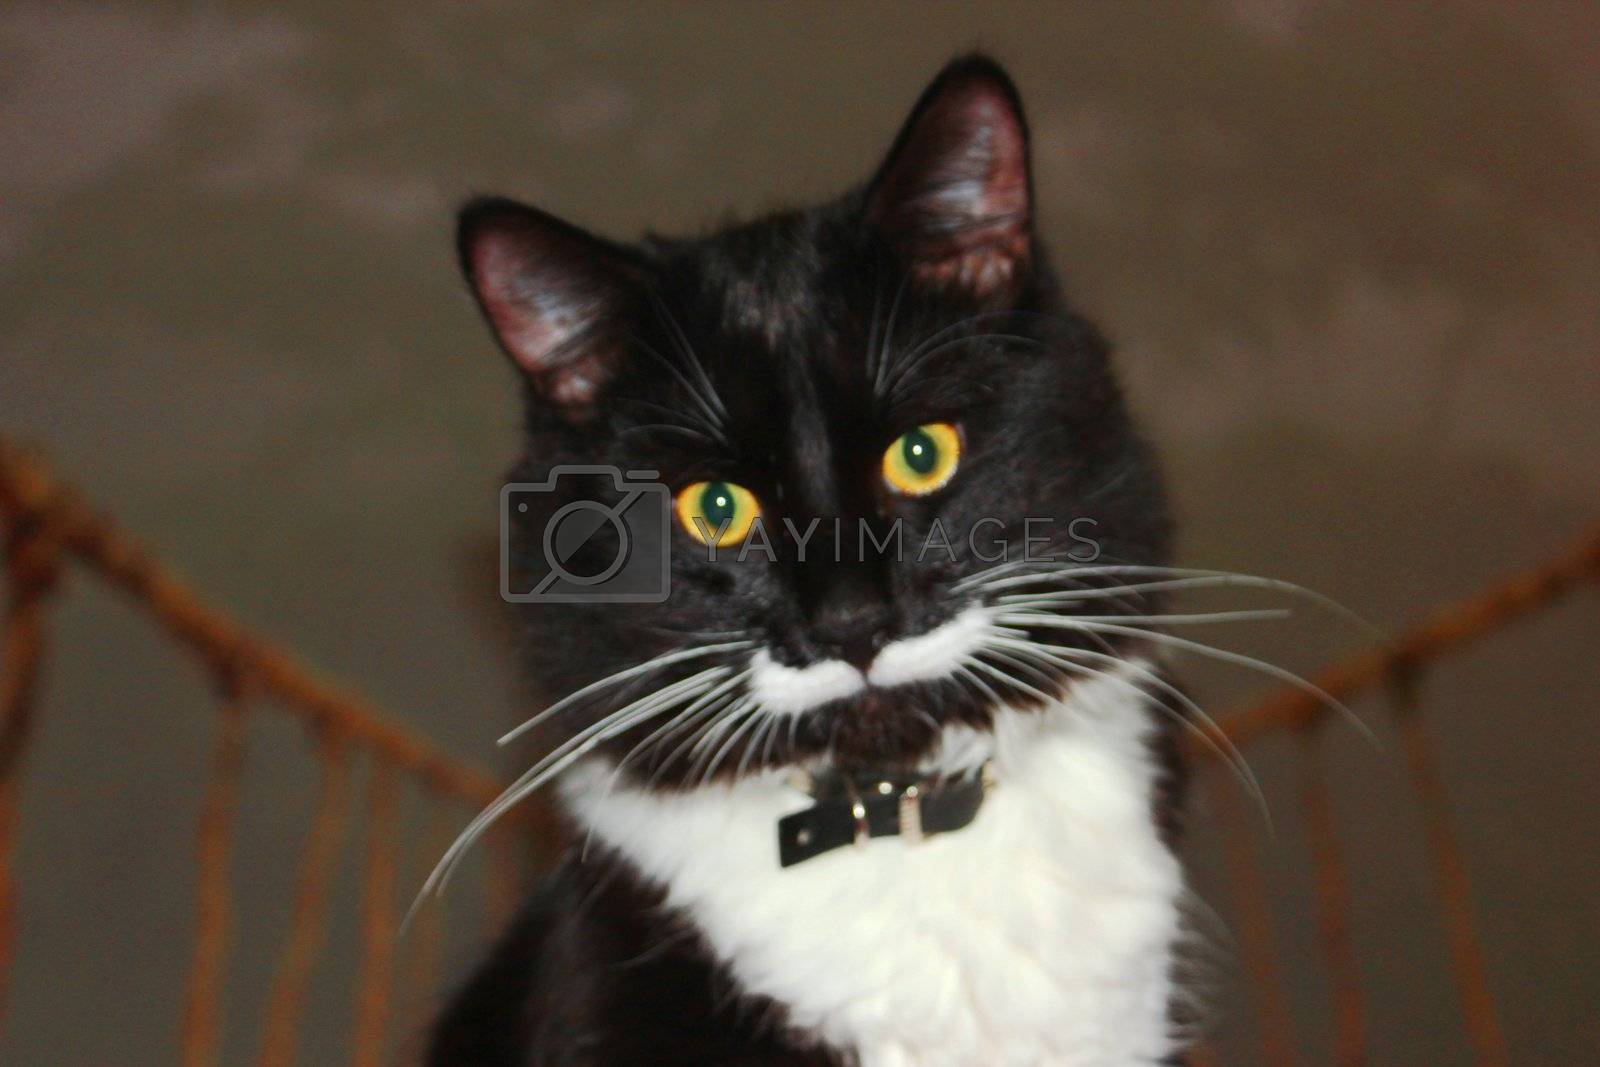 Black And White Cat With Long Mustache Royalty Free Stock Image Yayimages Royalty Free Stock Photos And Vectors,Anniversary Ideas